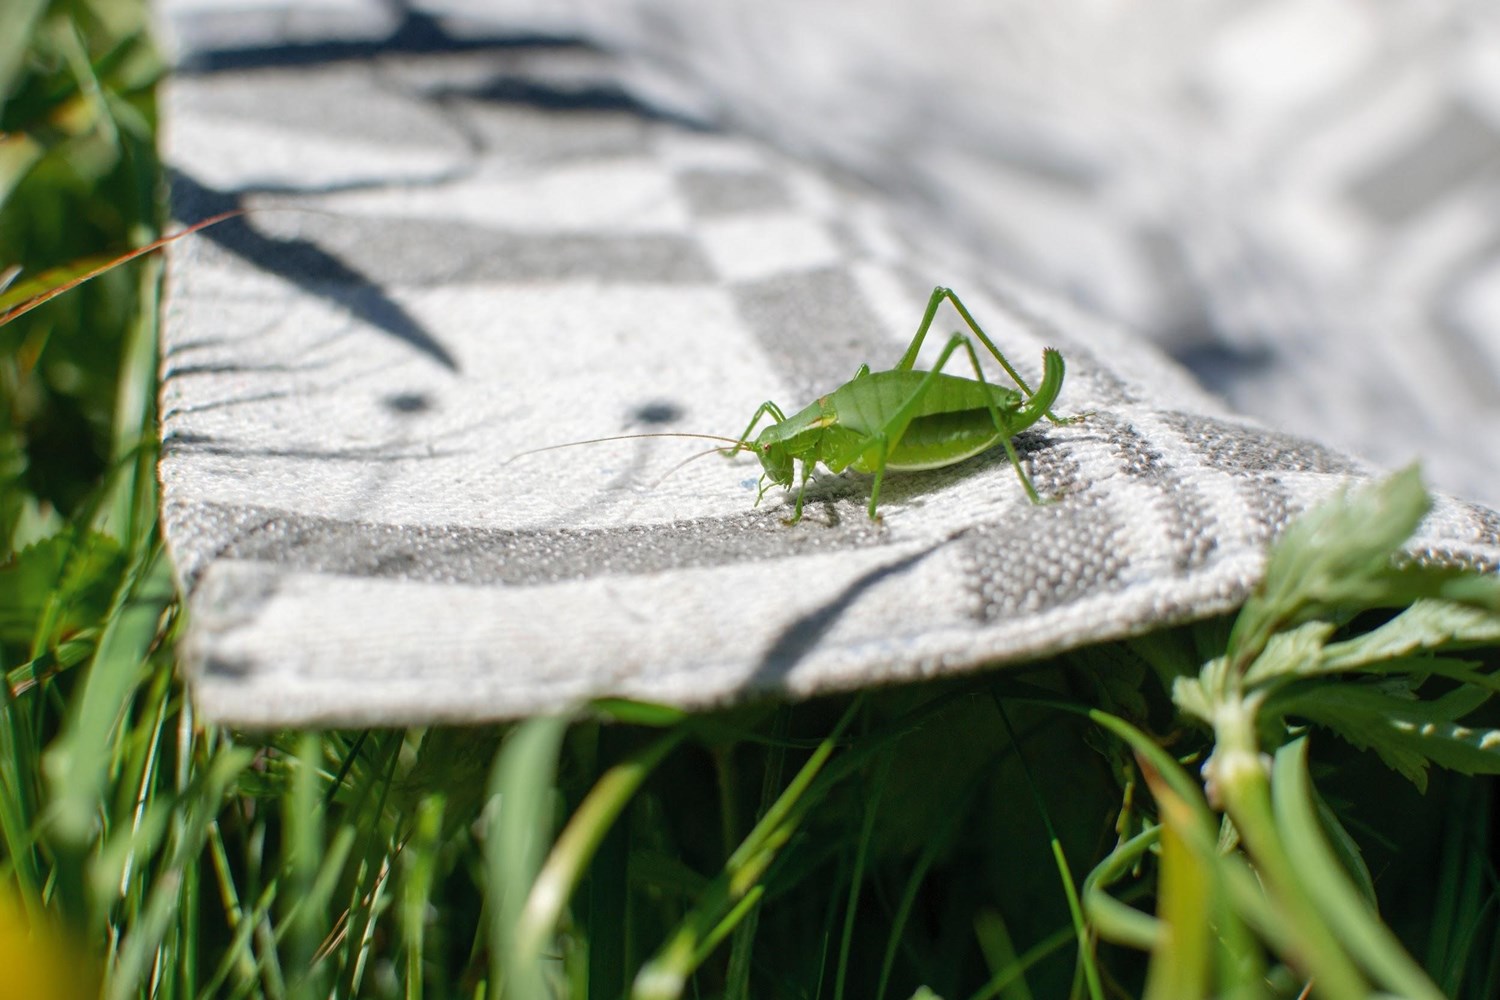 A green six-legged cricket crawling across a checkered picnic blanket that is spread across grass. 